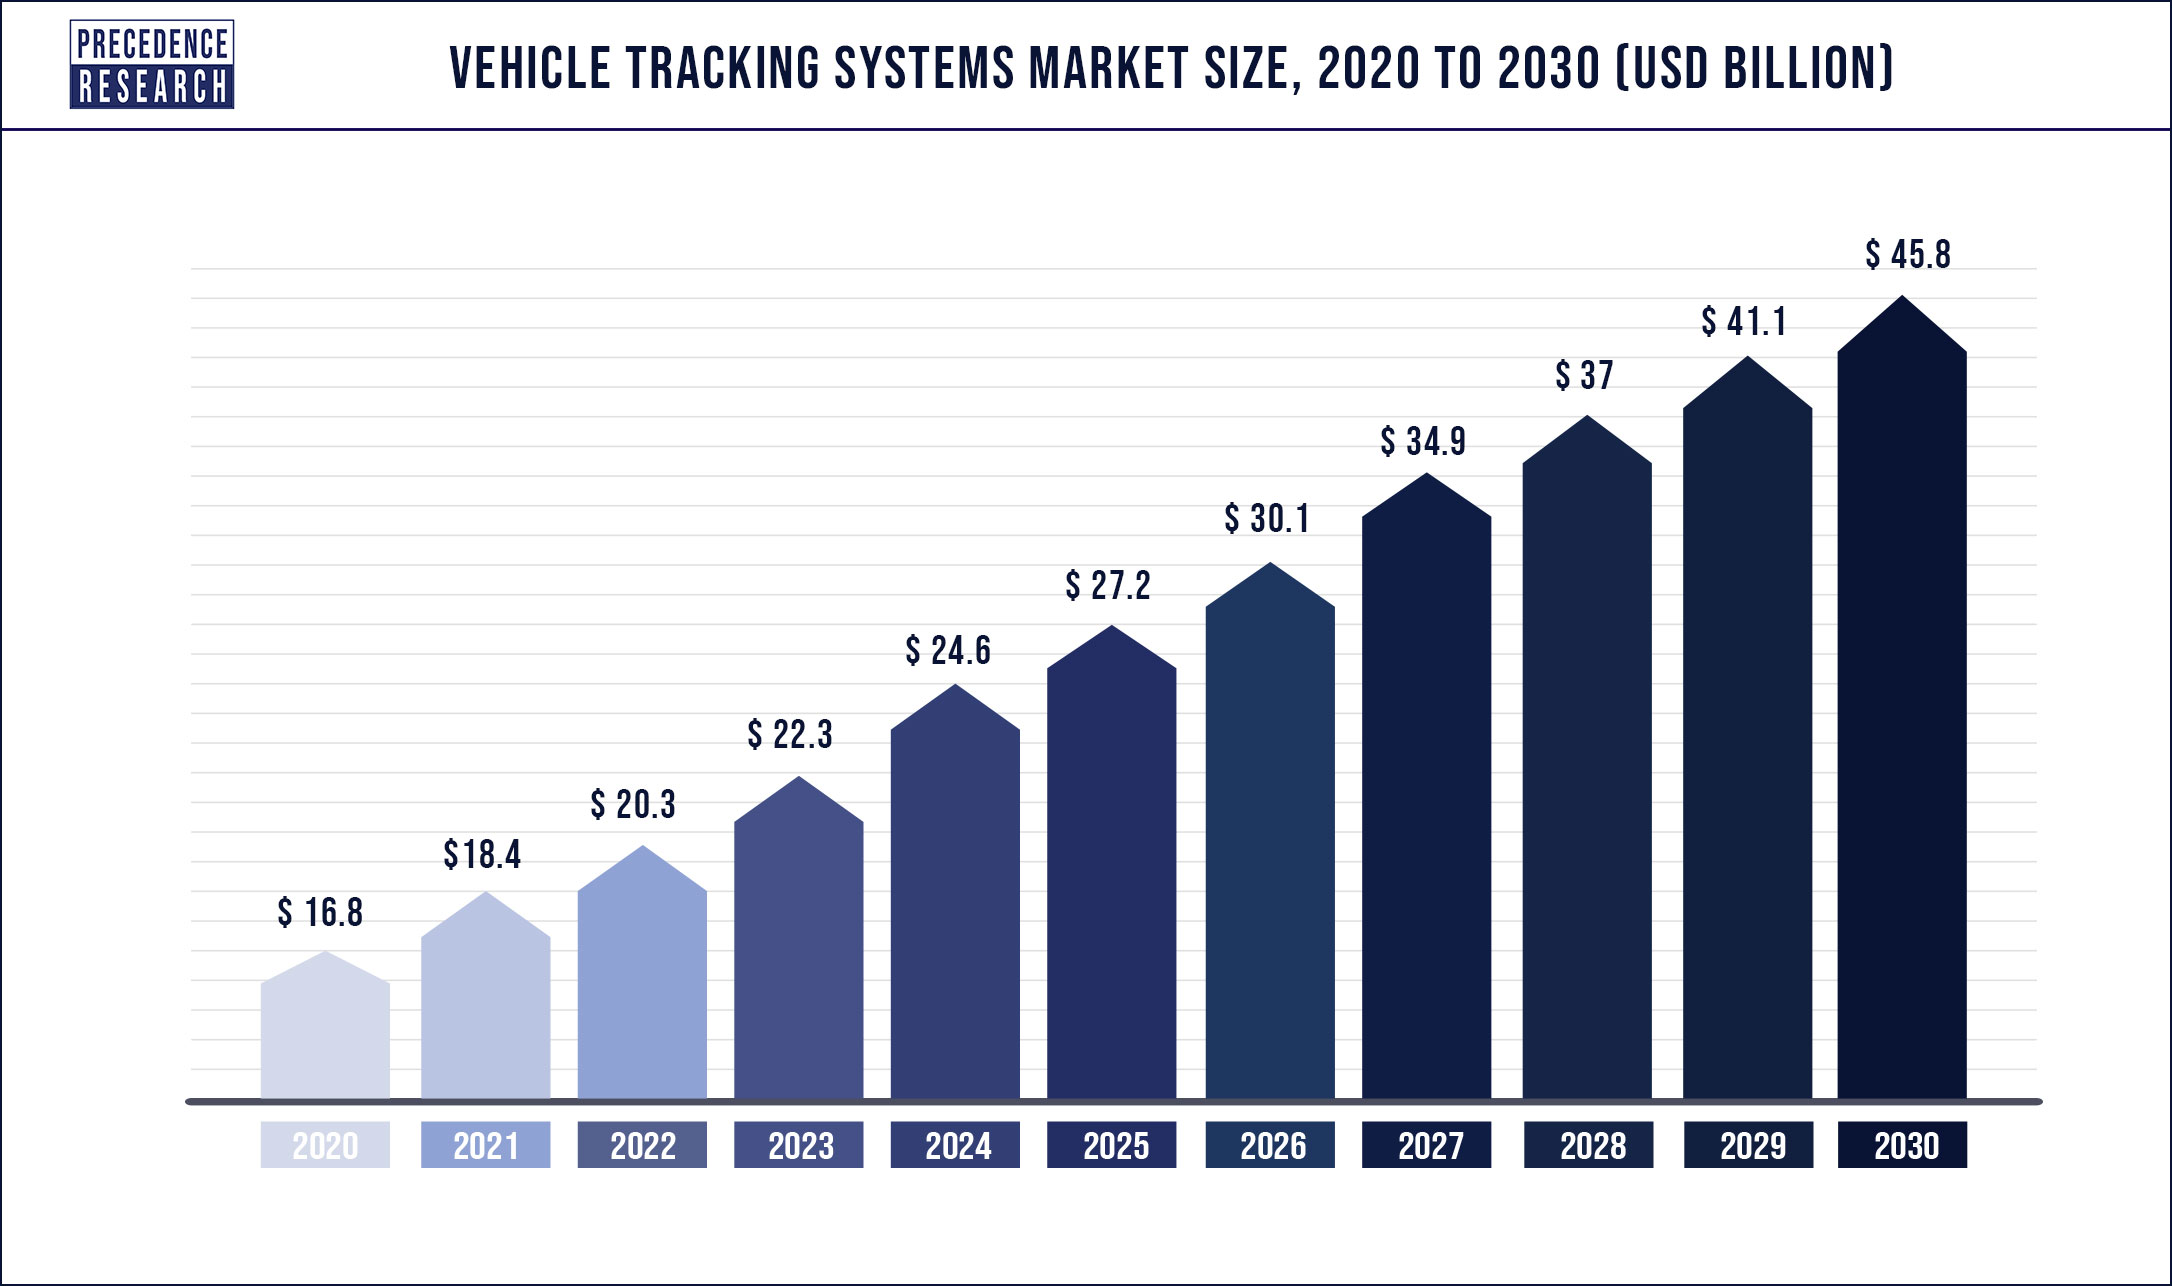 Vehicle Tracking Systems Market to Touch US$ 45.8 Billion by 2030